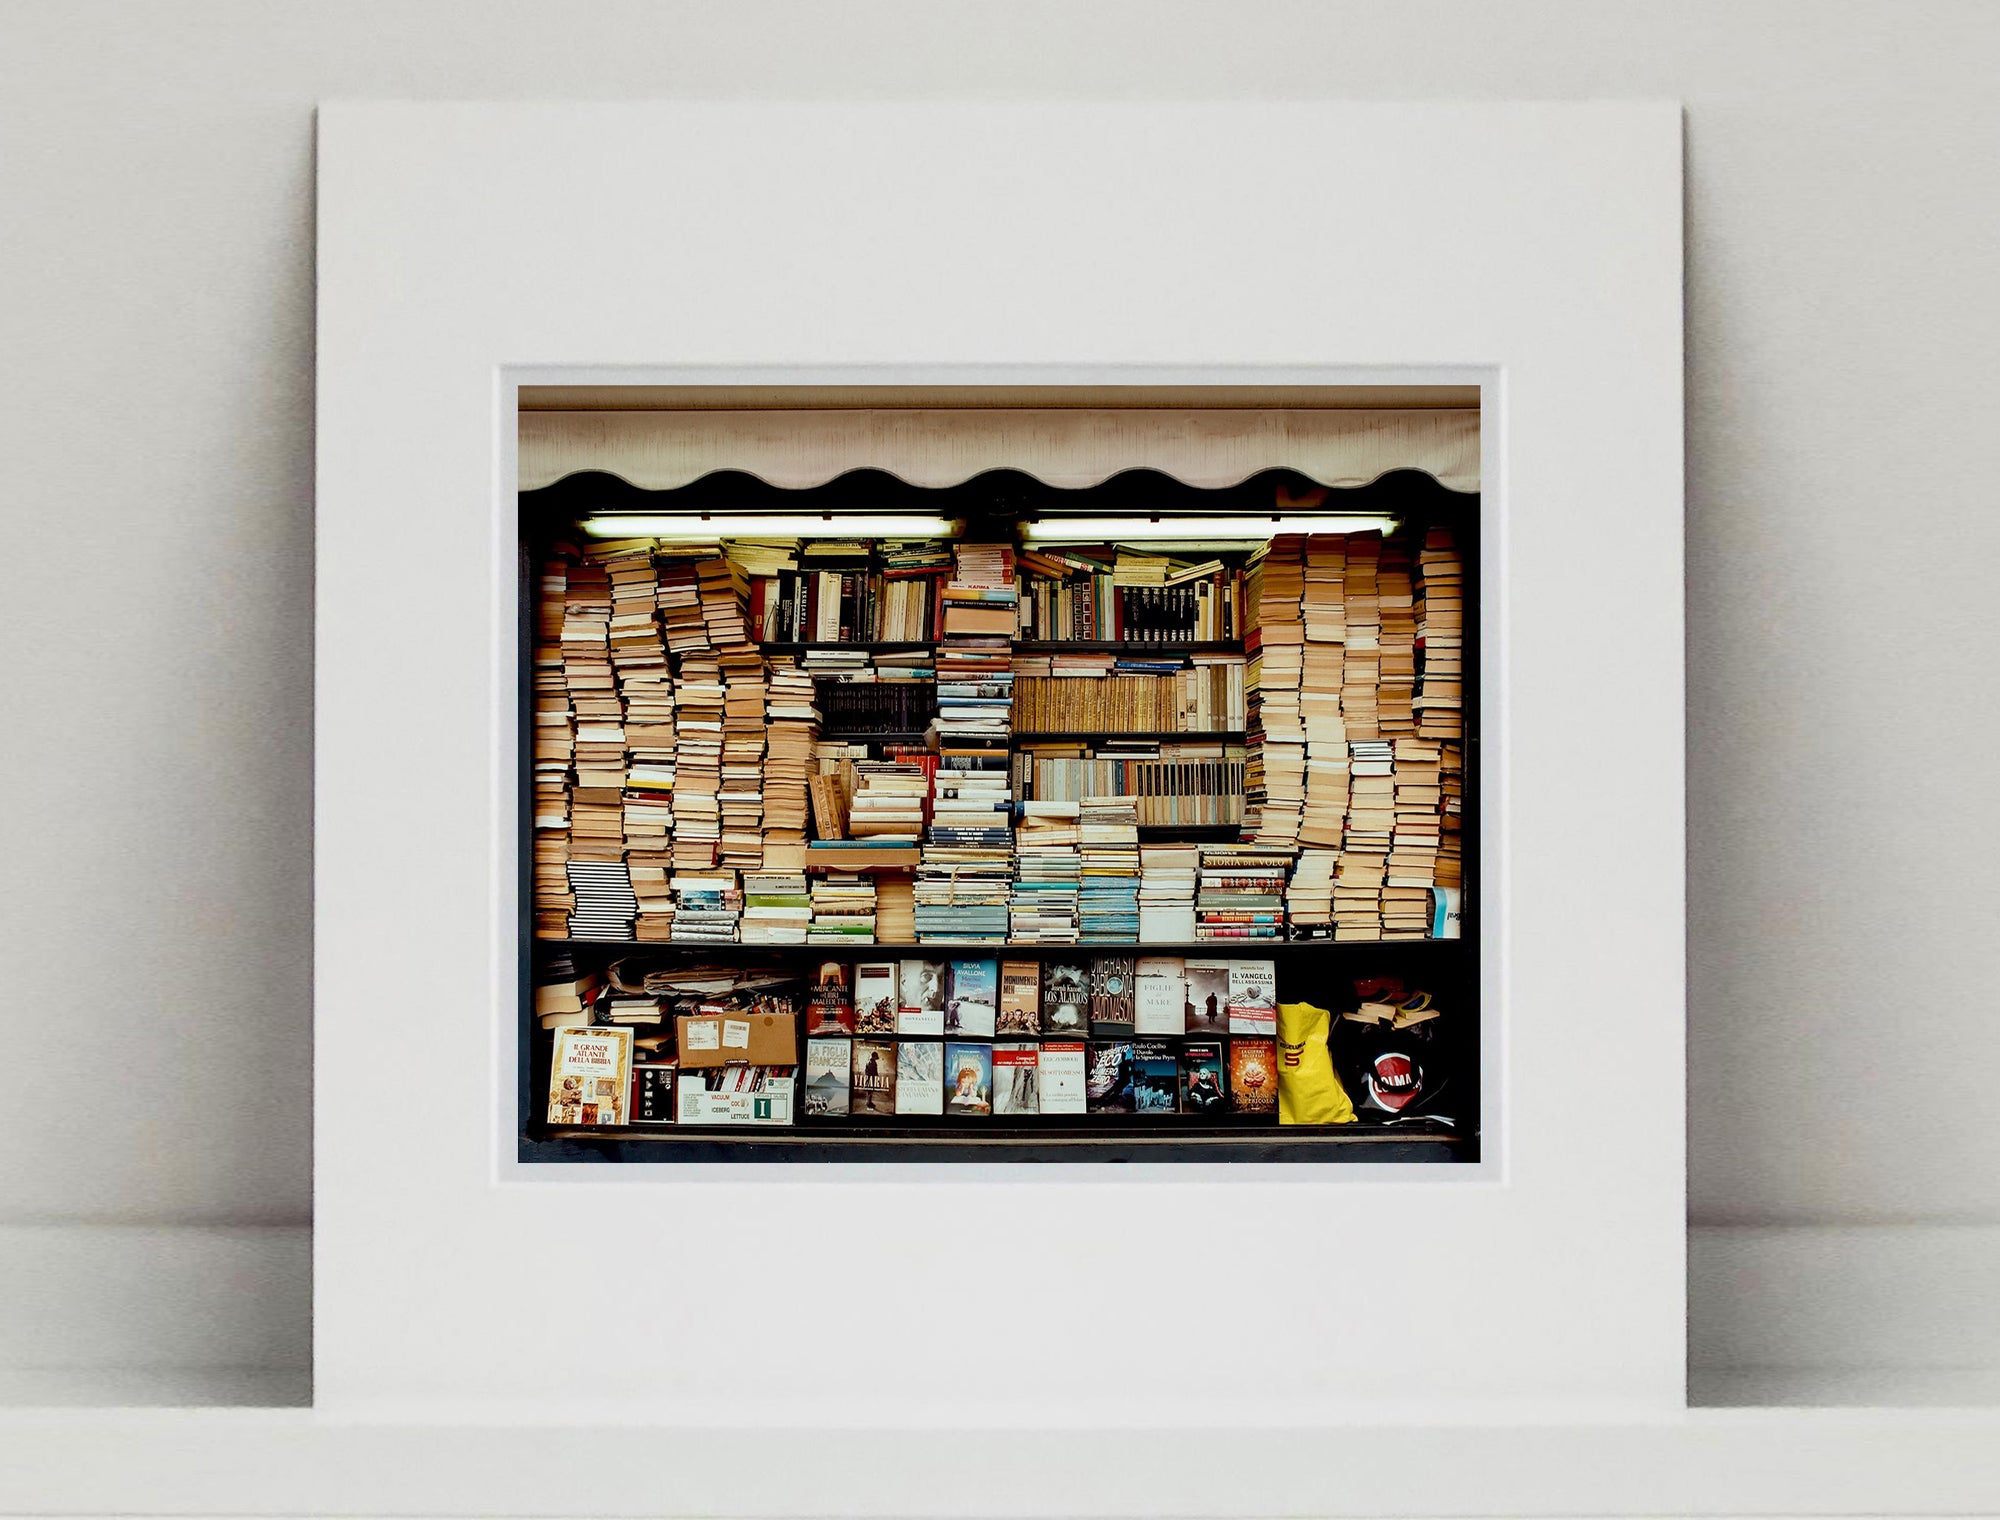 Books photographed under fluorescent lighting as part of Richard Heeps’ series A Short History of Milan.